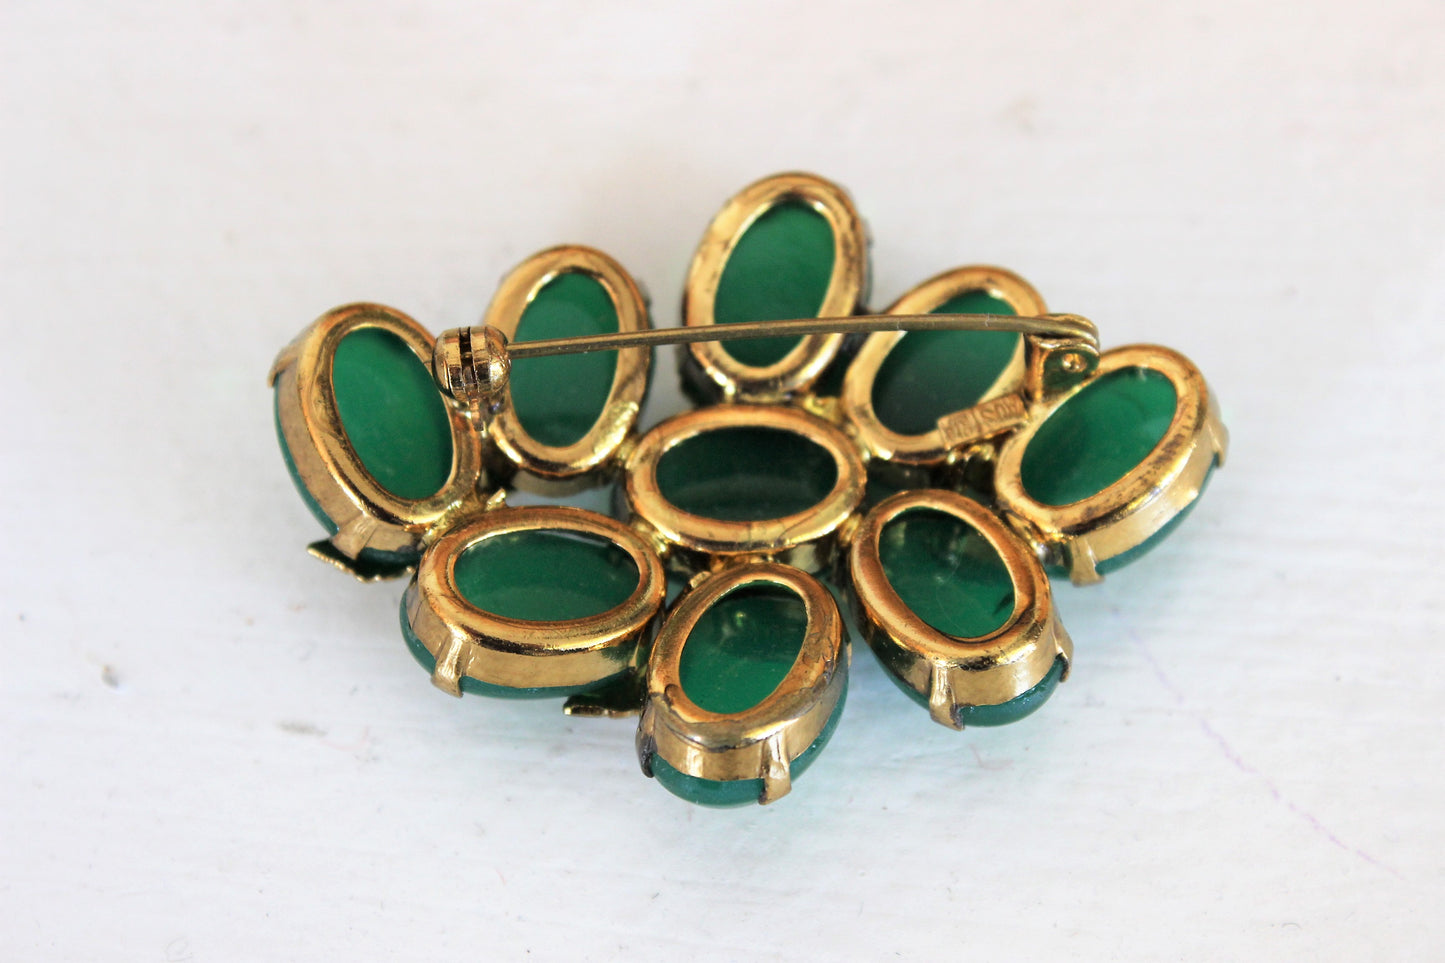 Vintage Mid Century Austrian Green Glass Beads With Gold Leaves Brooch